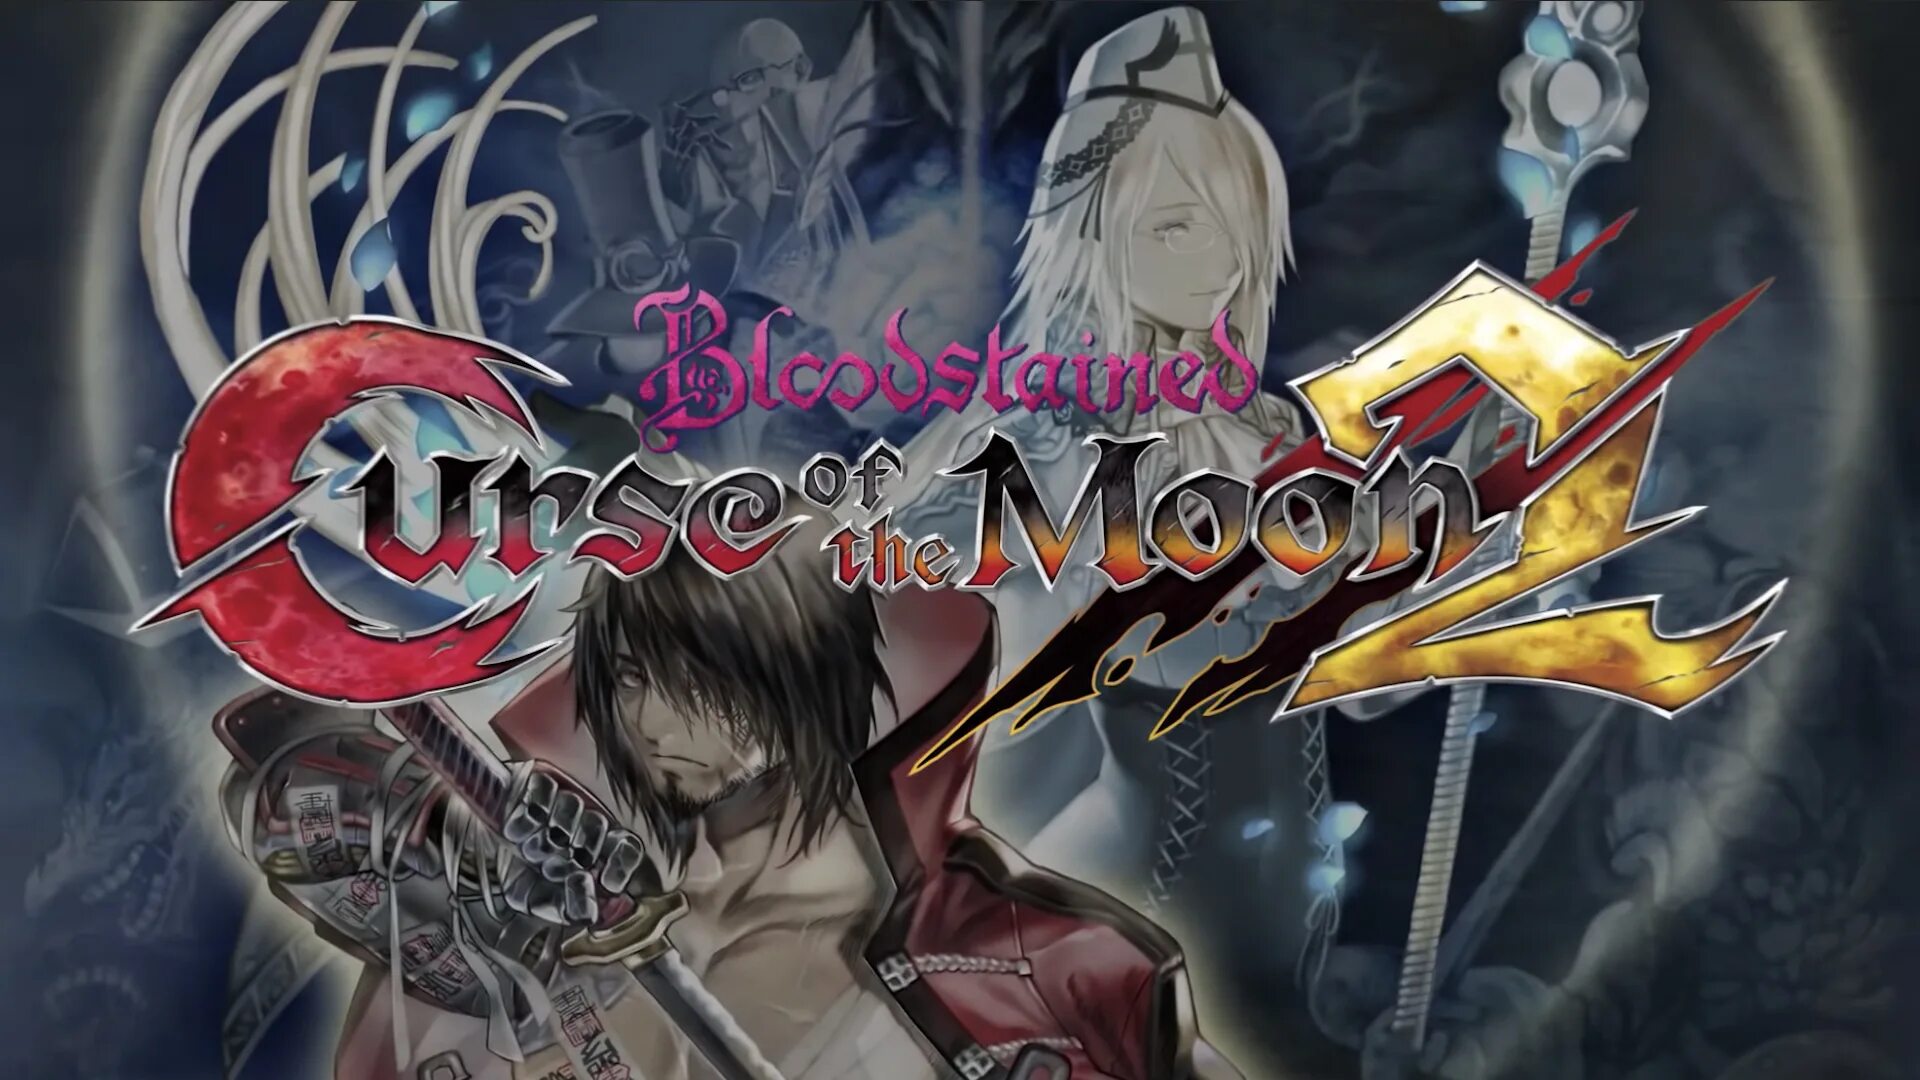 Bloodstained Curse of the Moon 2. Bloodstained Curse of the Moon 2 Arts. Bloodstained проклятие Луны. Мириам Bloodstained.